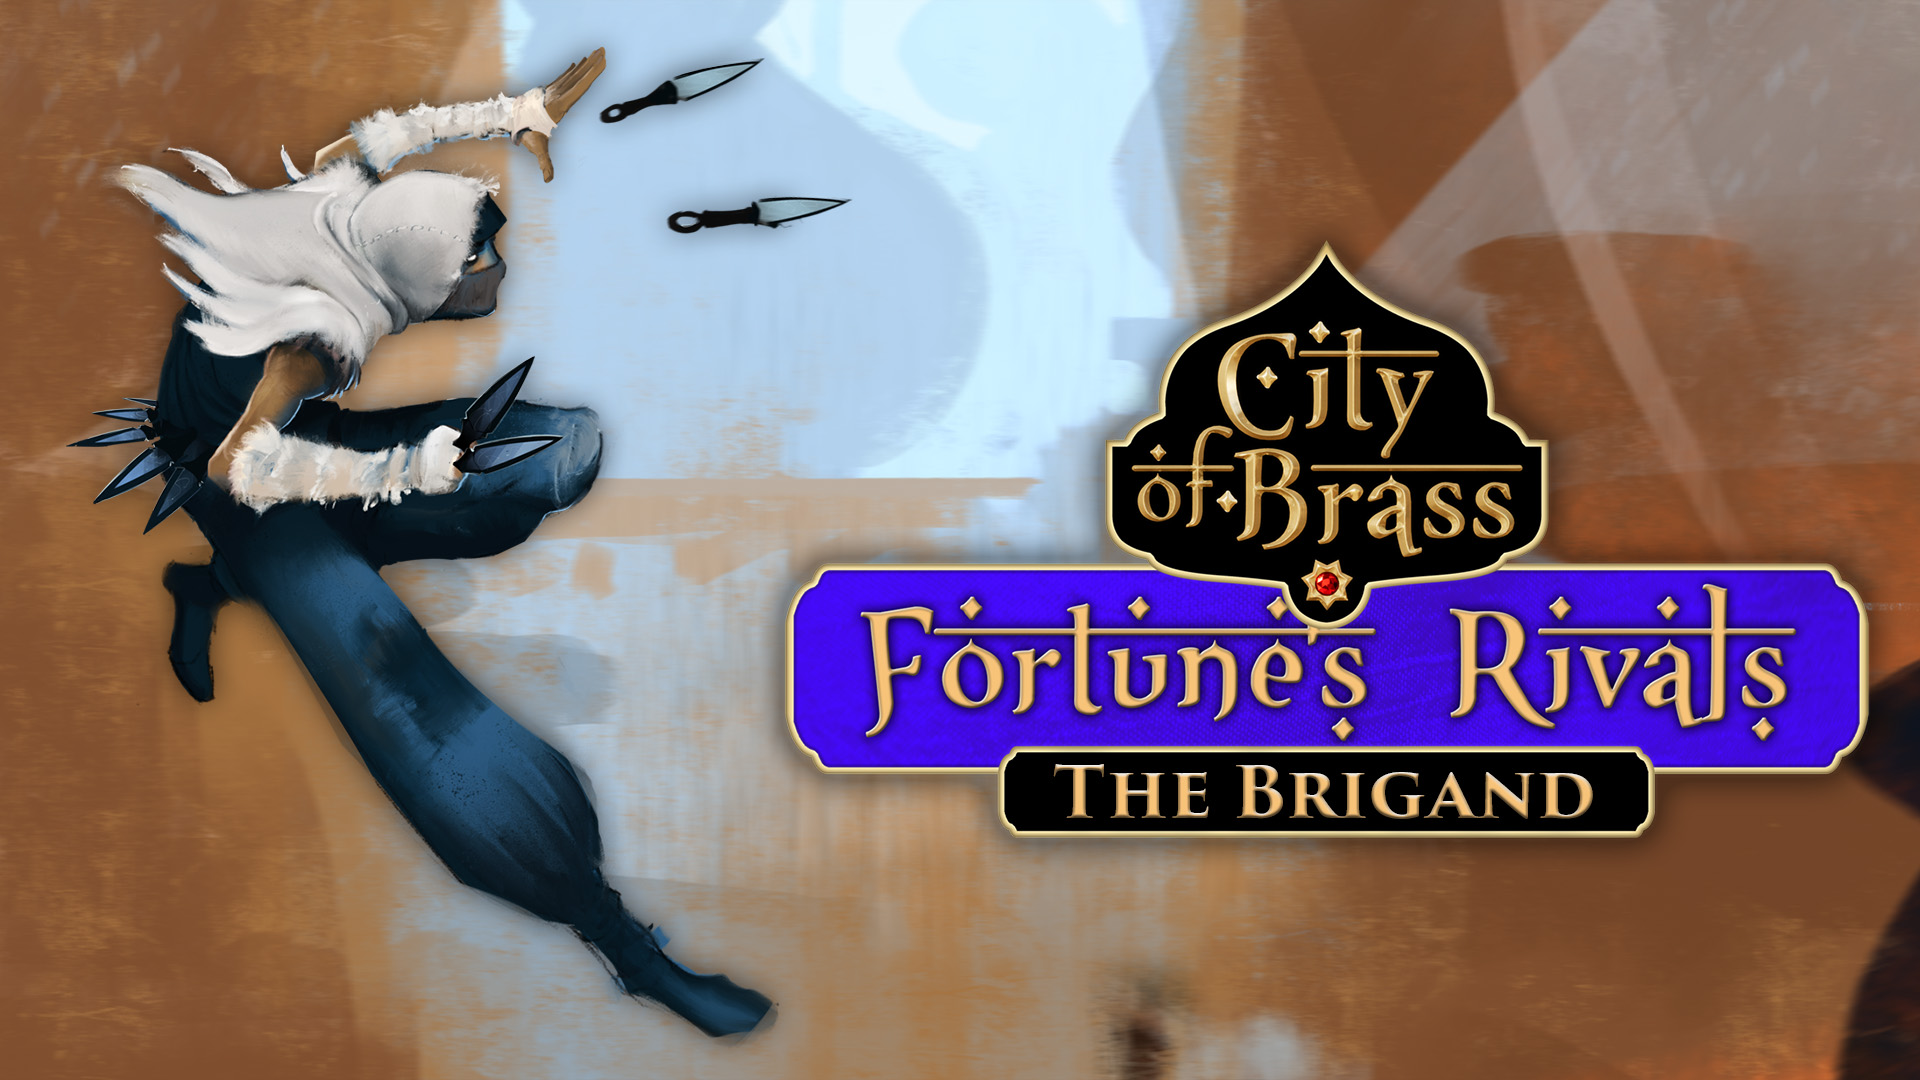 city of brass, fortune's rivals, fortunes rivals, city of brass fortunes rivals, city of brass update, fortunes rivals update, uppercut games, city of brass news, city of brass uppercut games, gigamax games, video game news, gaming news